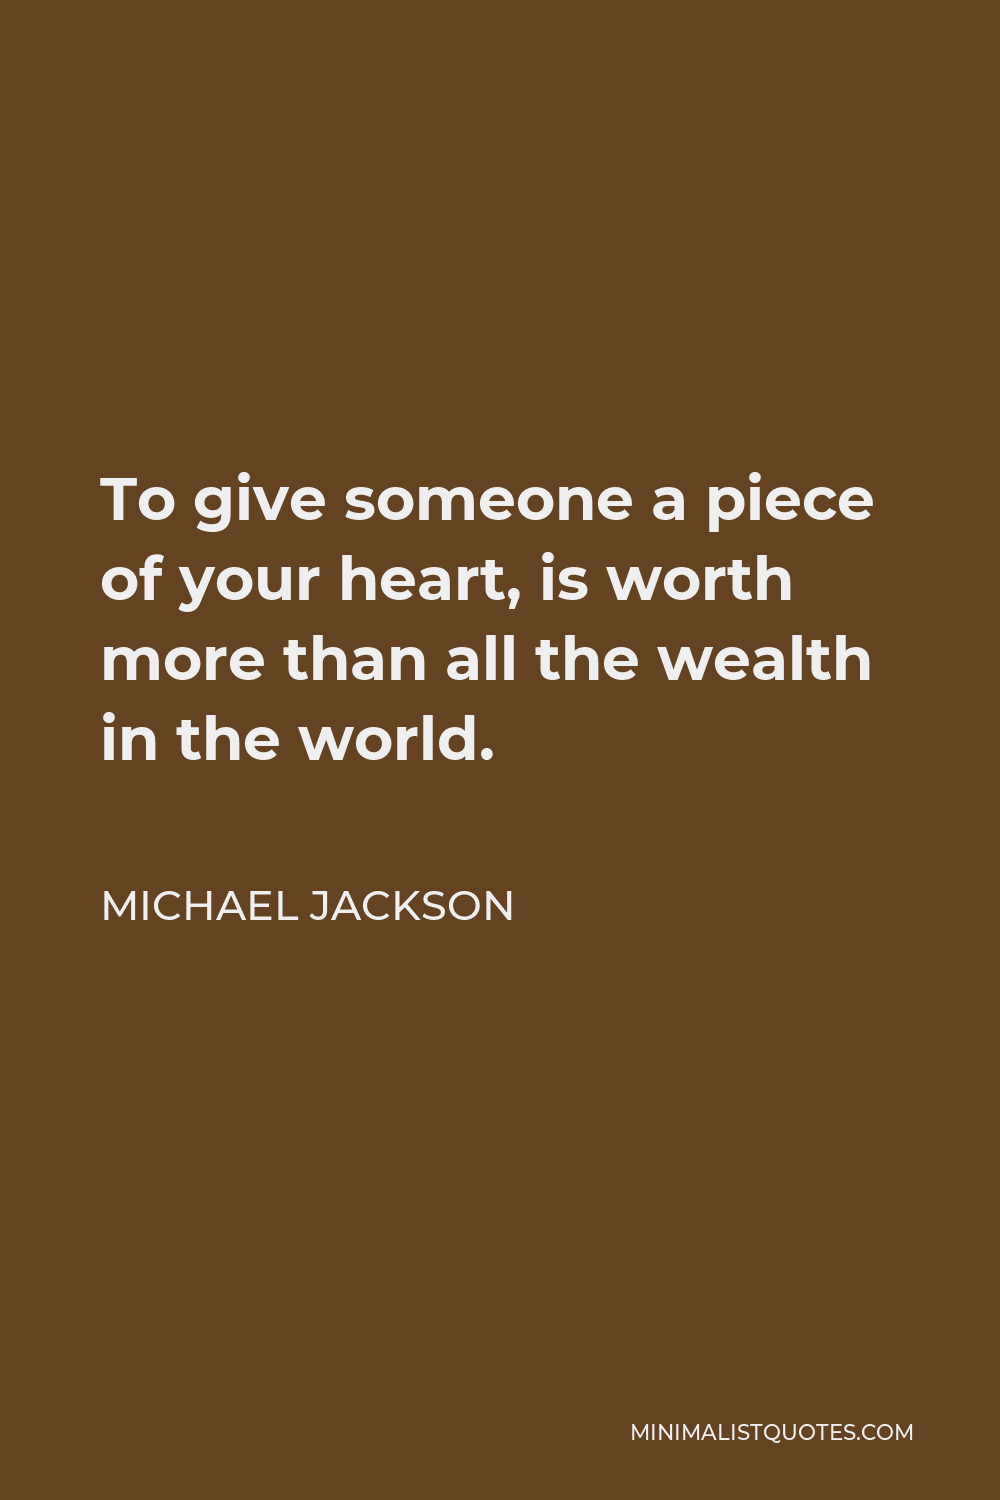 Michael Jackson Quote - To give someone a piece of your heart, is worth more than all the wealth in the world.